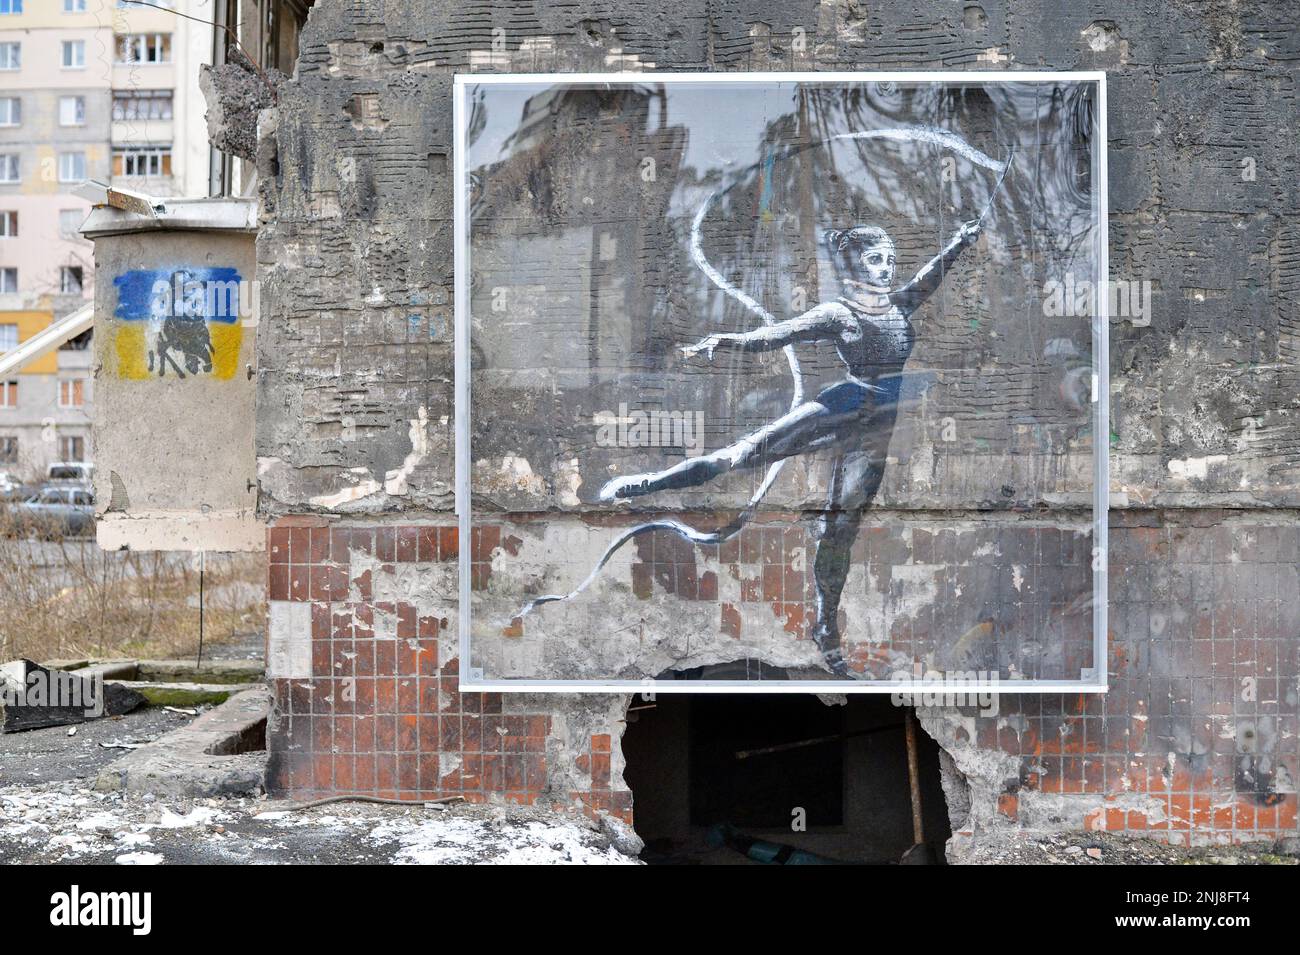 IRPIN, UKRAINE - FEBRUARY 22, 2023 - A protective glass case seals the art piece that depicts a rhythmic gymnast performing the ribbon routine created Stock Photo